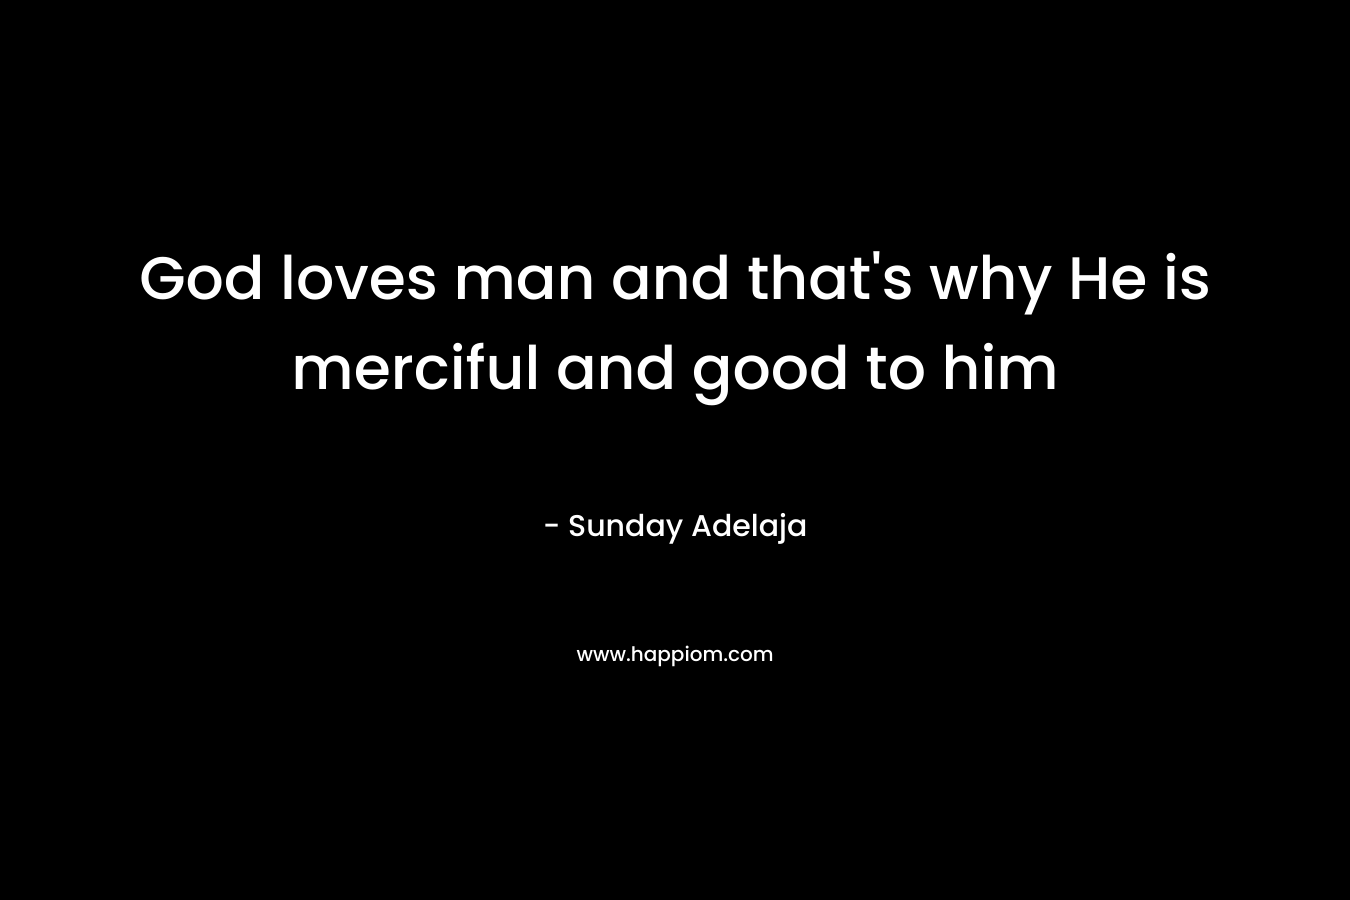 God loves man and that's why He is merciful and good to him